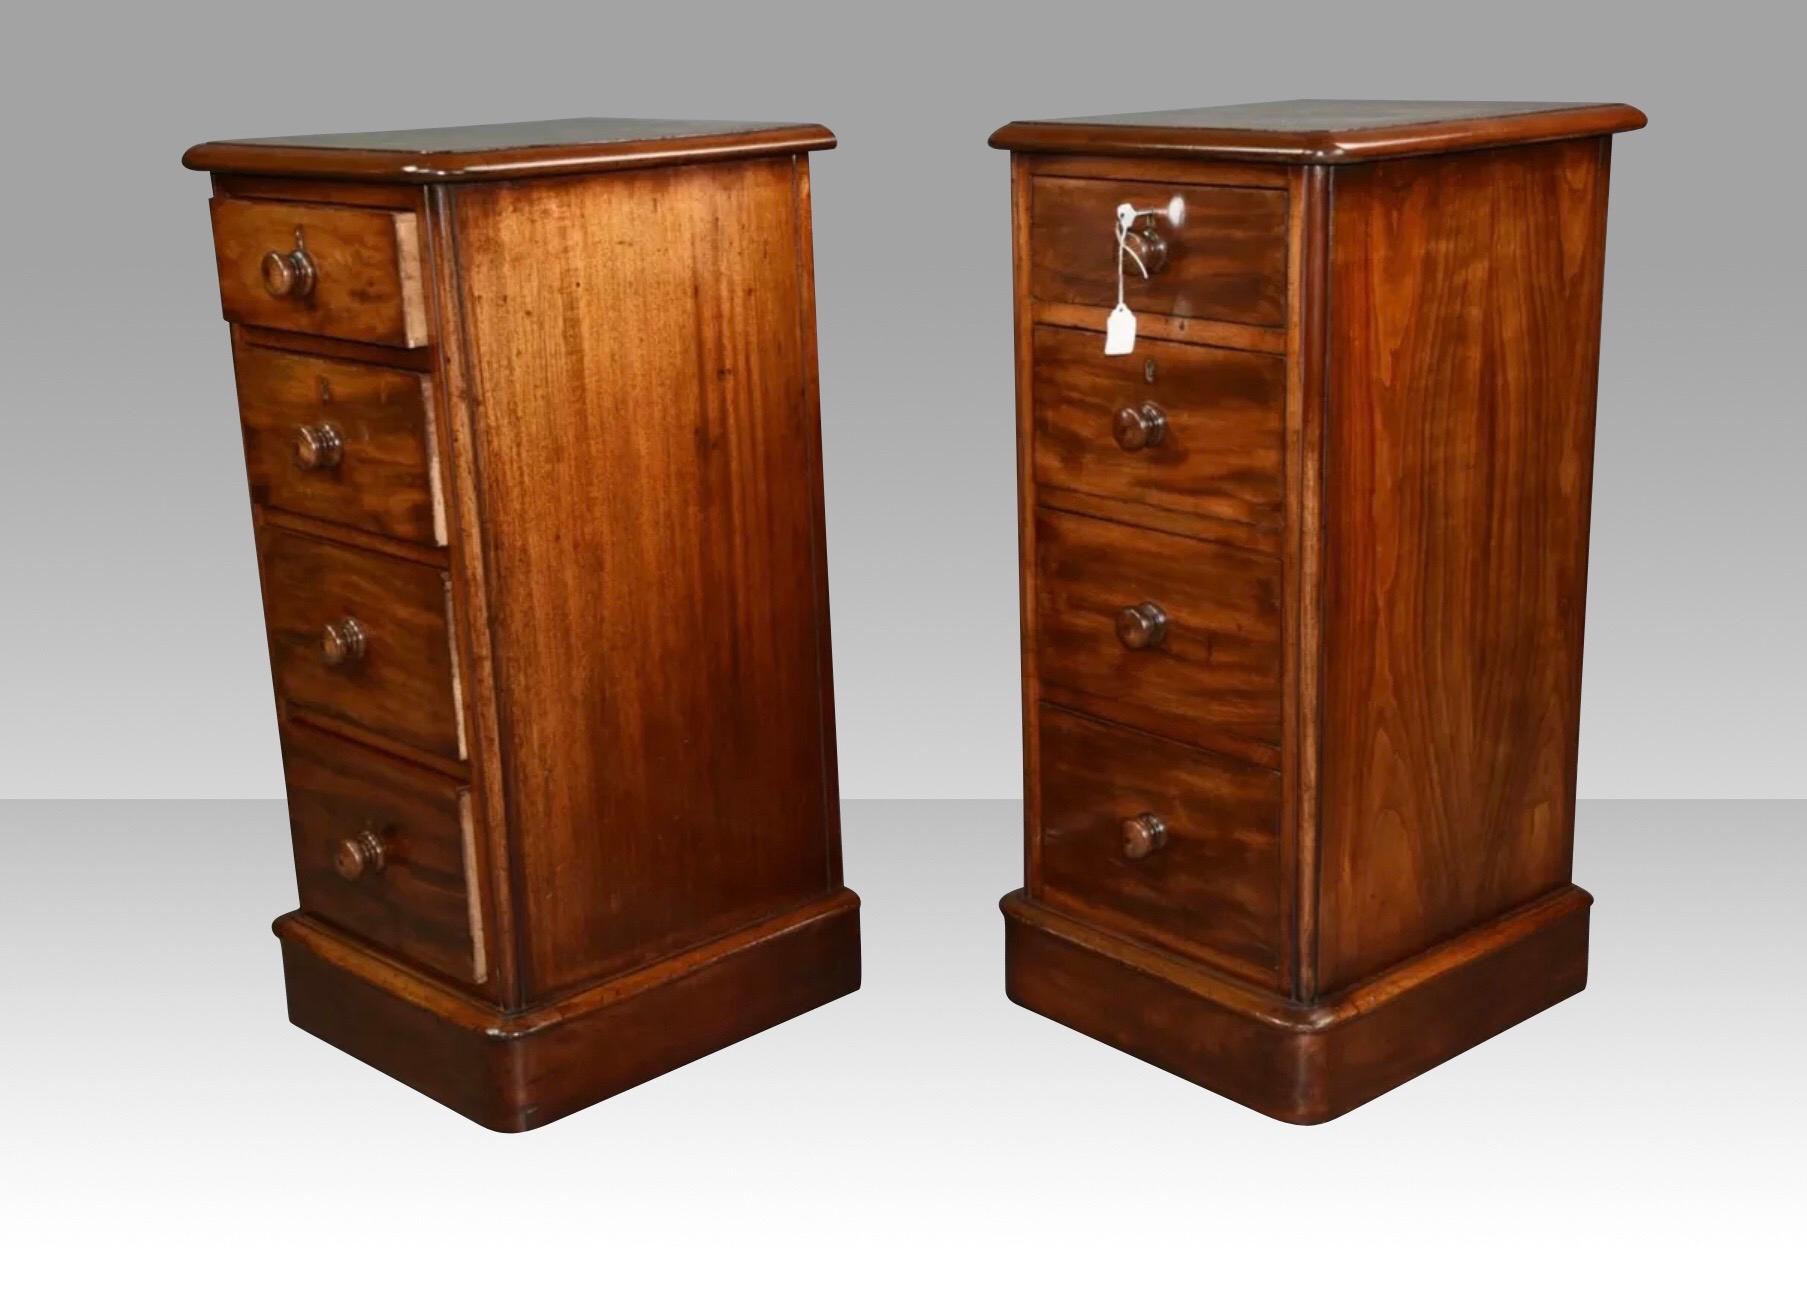 European Pair of Antique Mahogany Bedside Chests, Cabinets